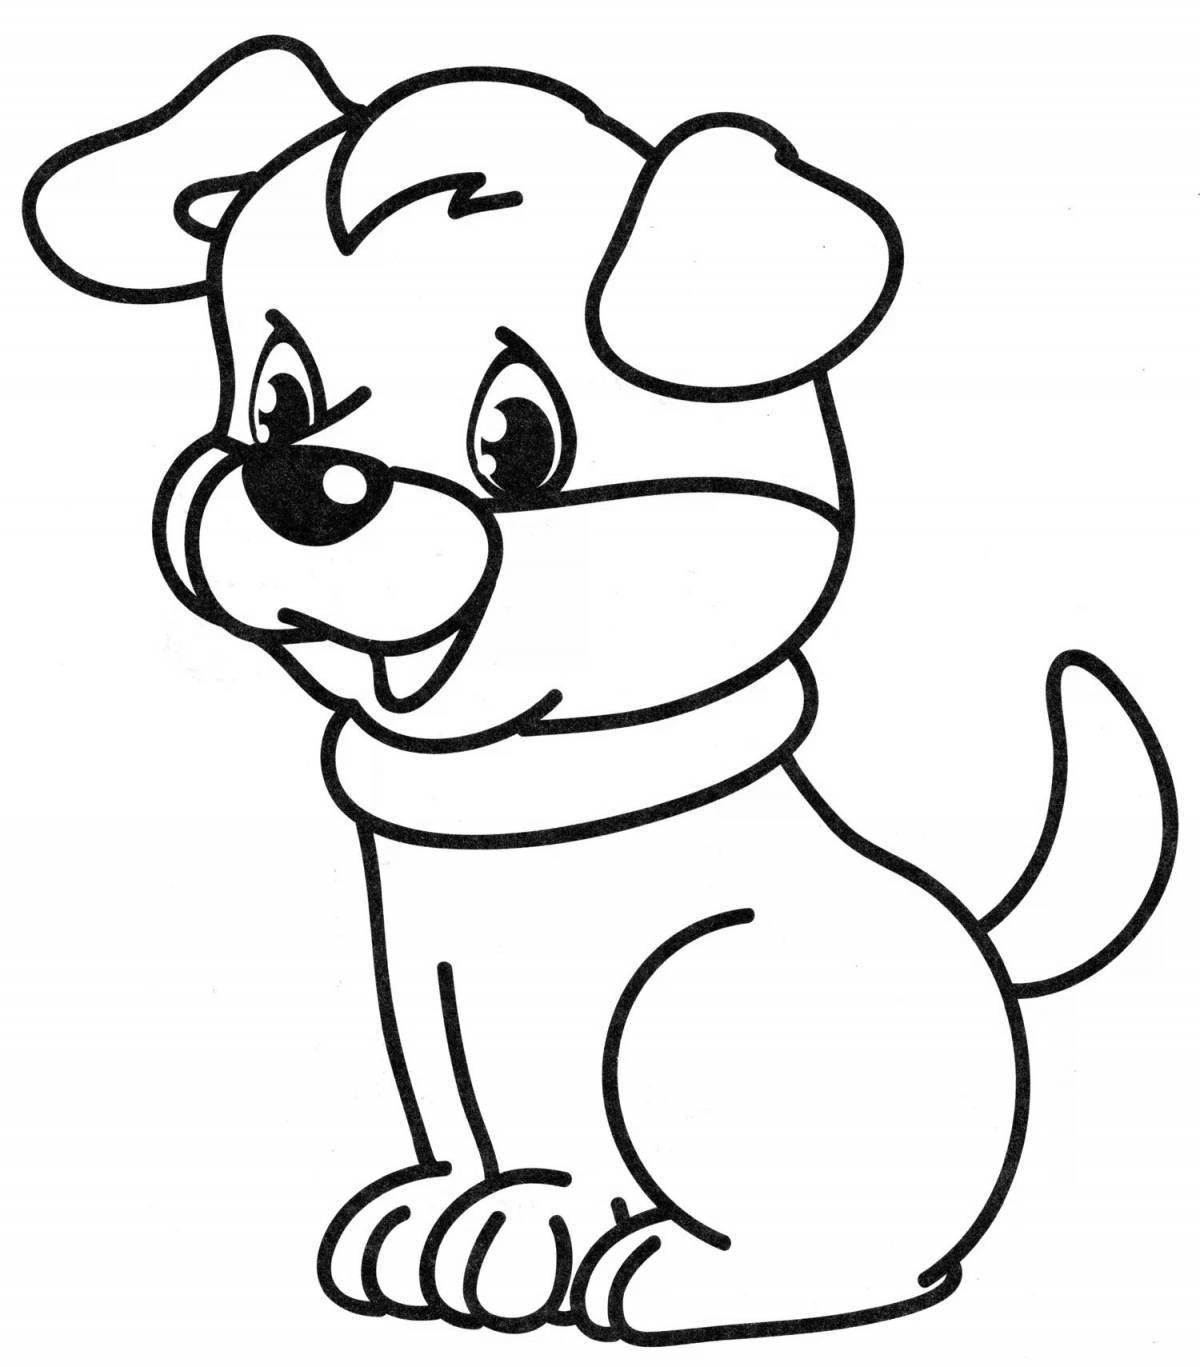 Coloring page loving puppy